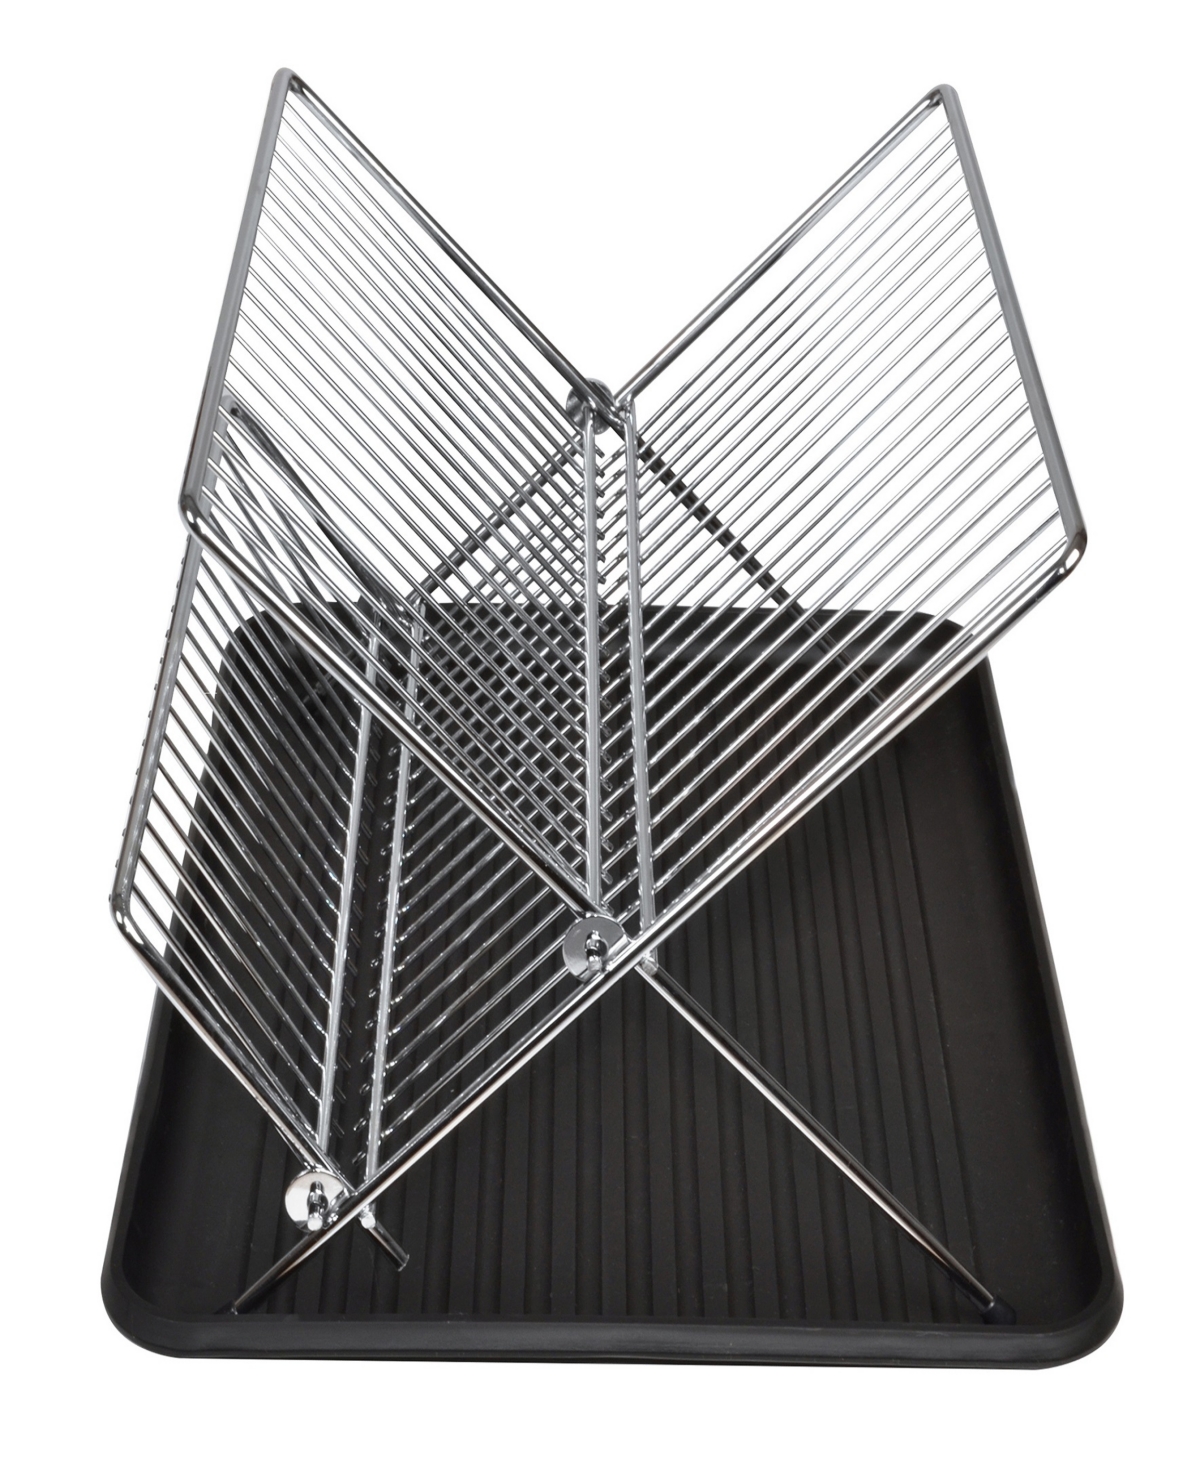 Dish Drainer Rack with in Sink or Counter Drying - Chrome